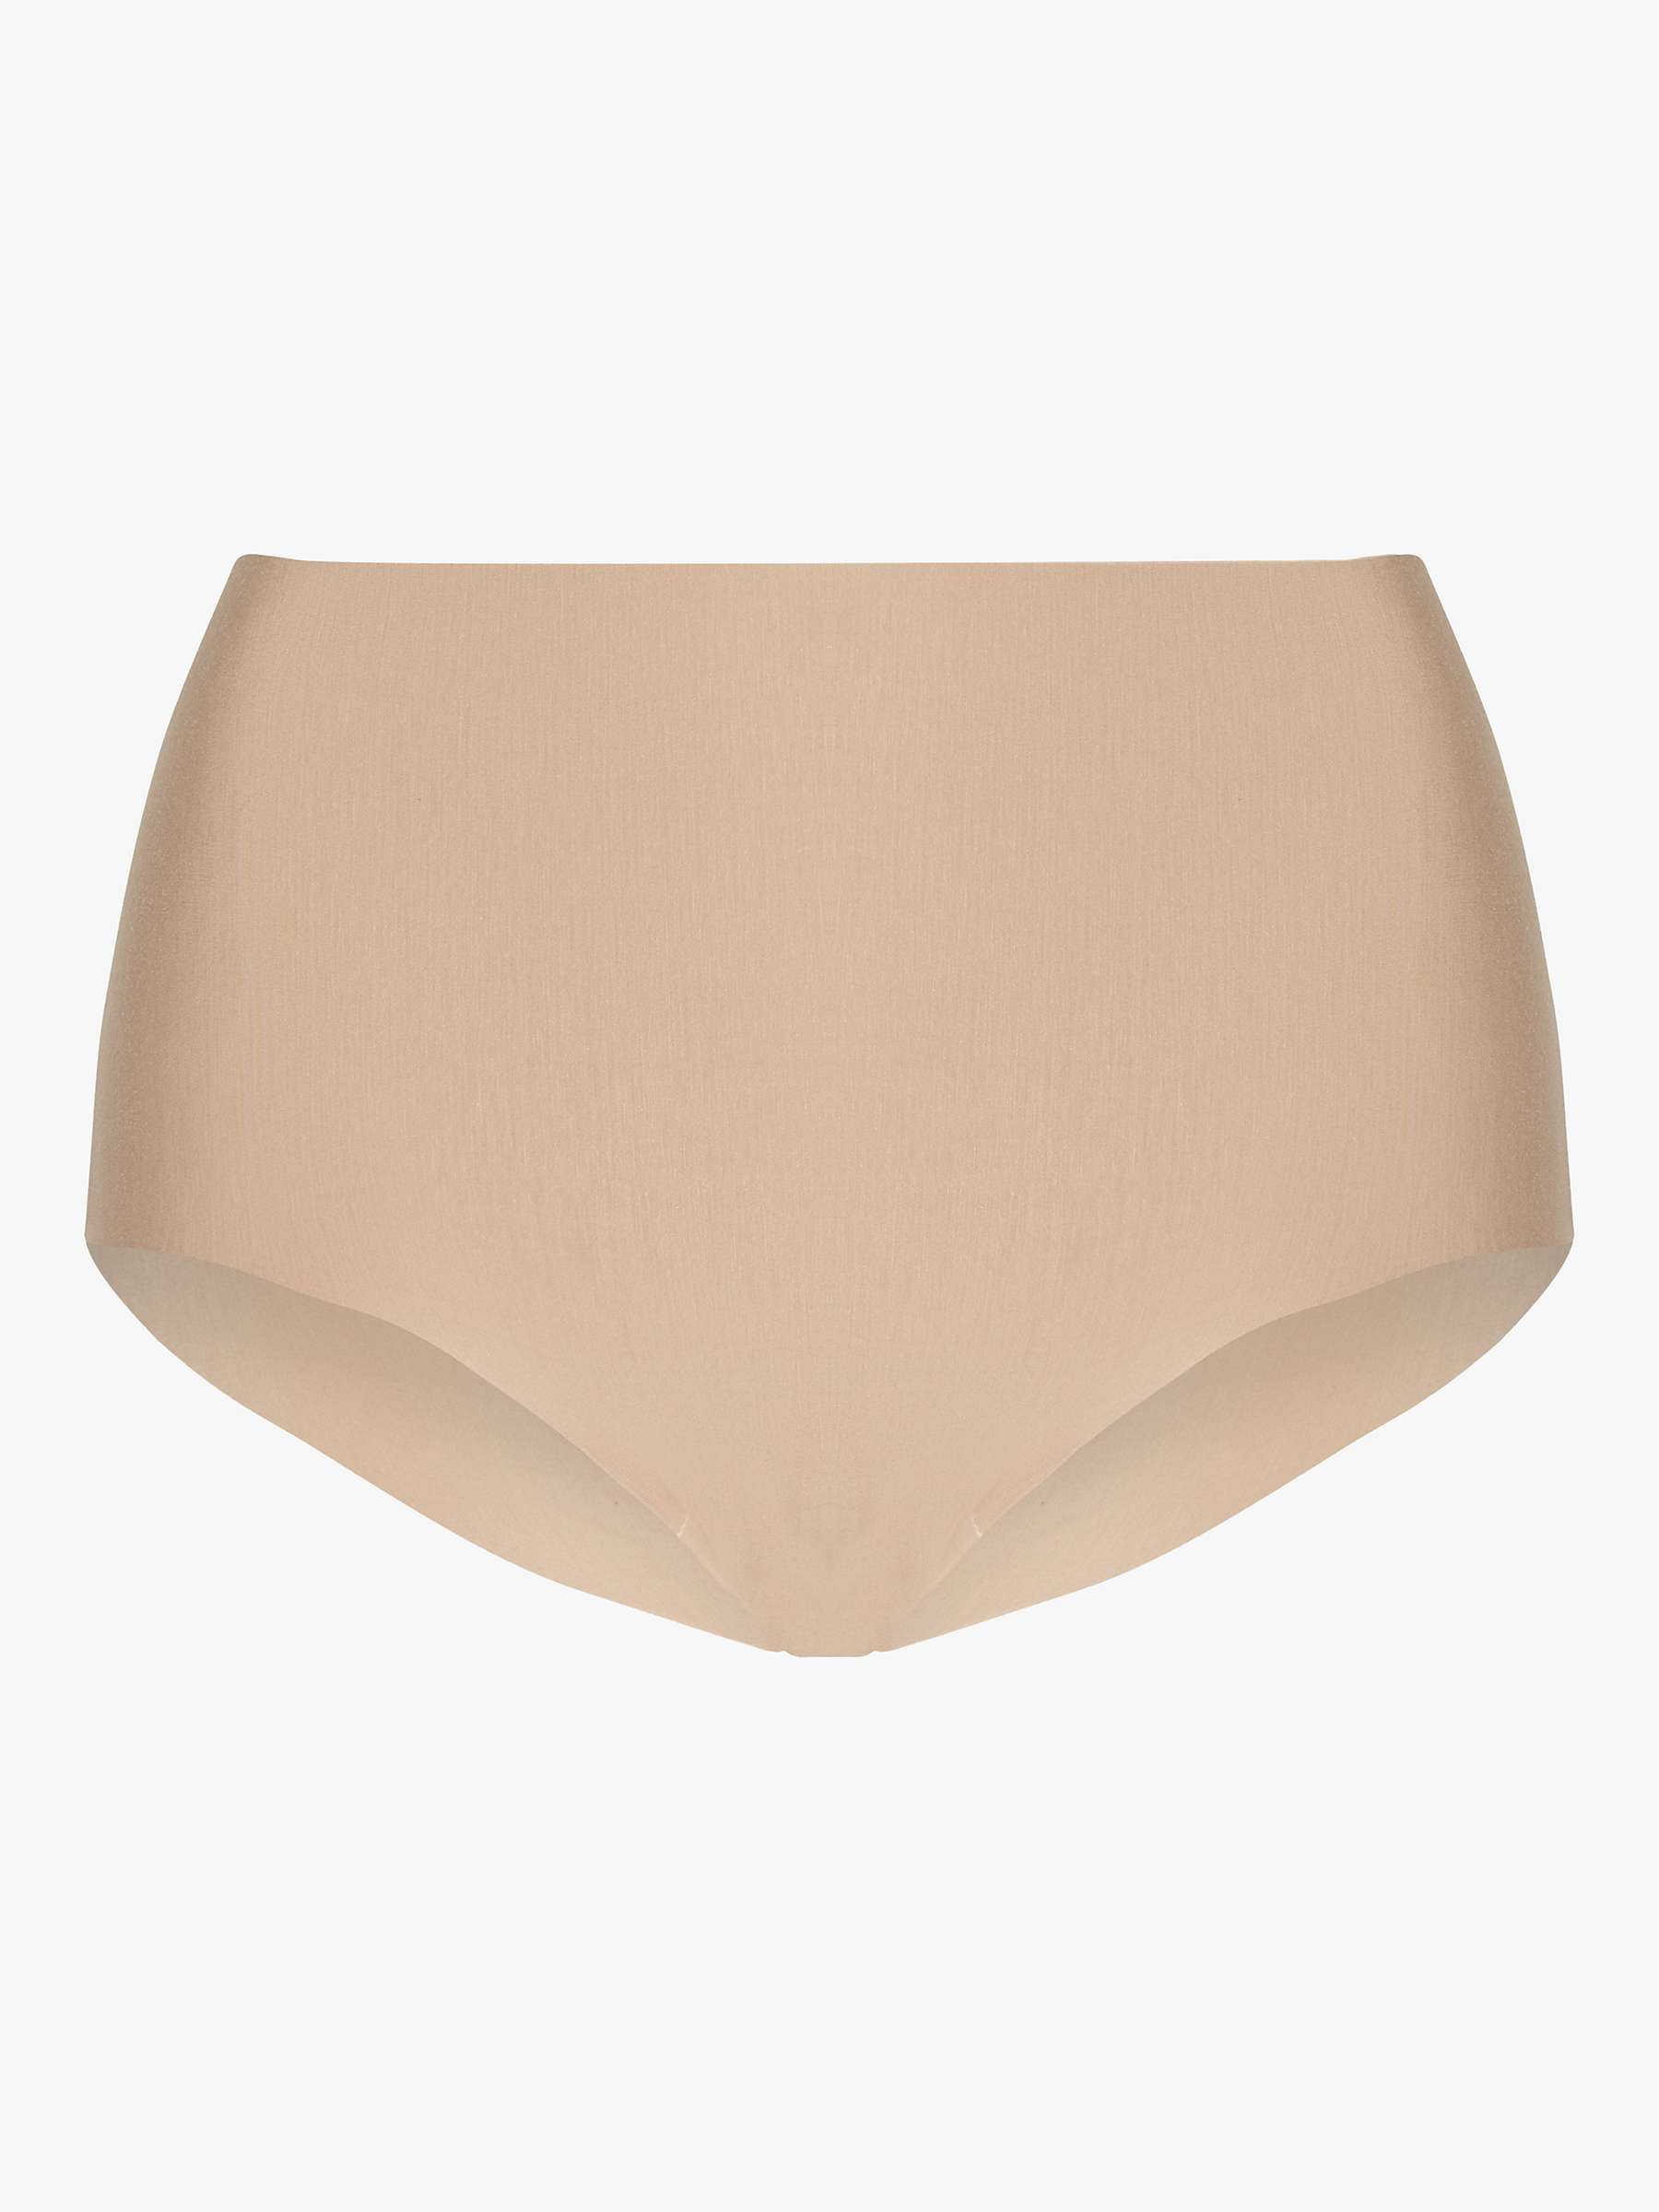 Buy Commando Butter High Rise Seamless Knickers Online at johnlewis.com